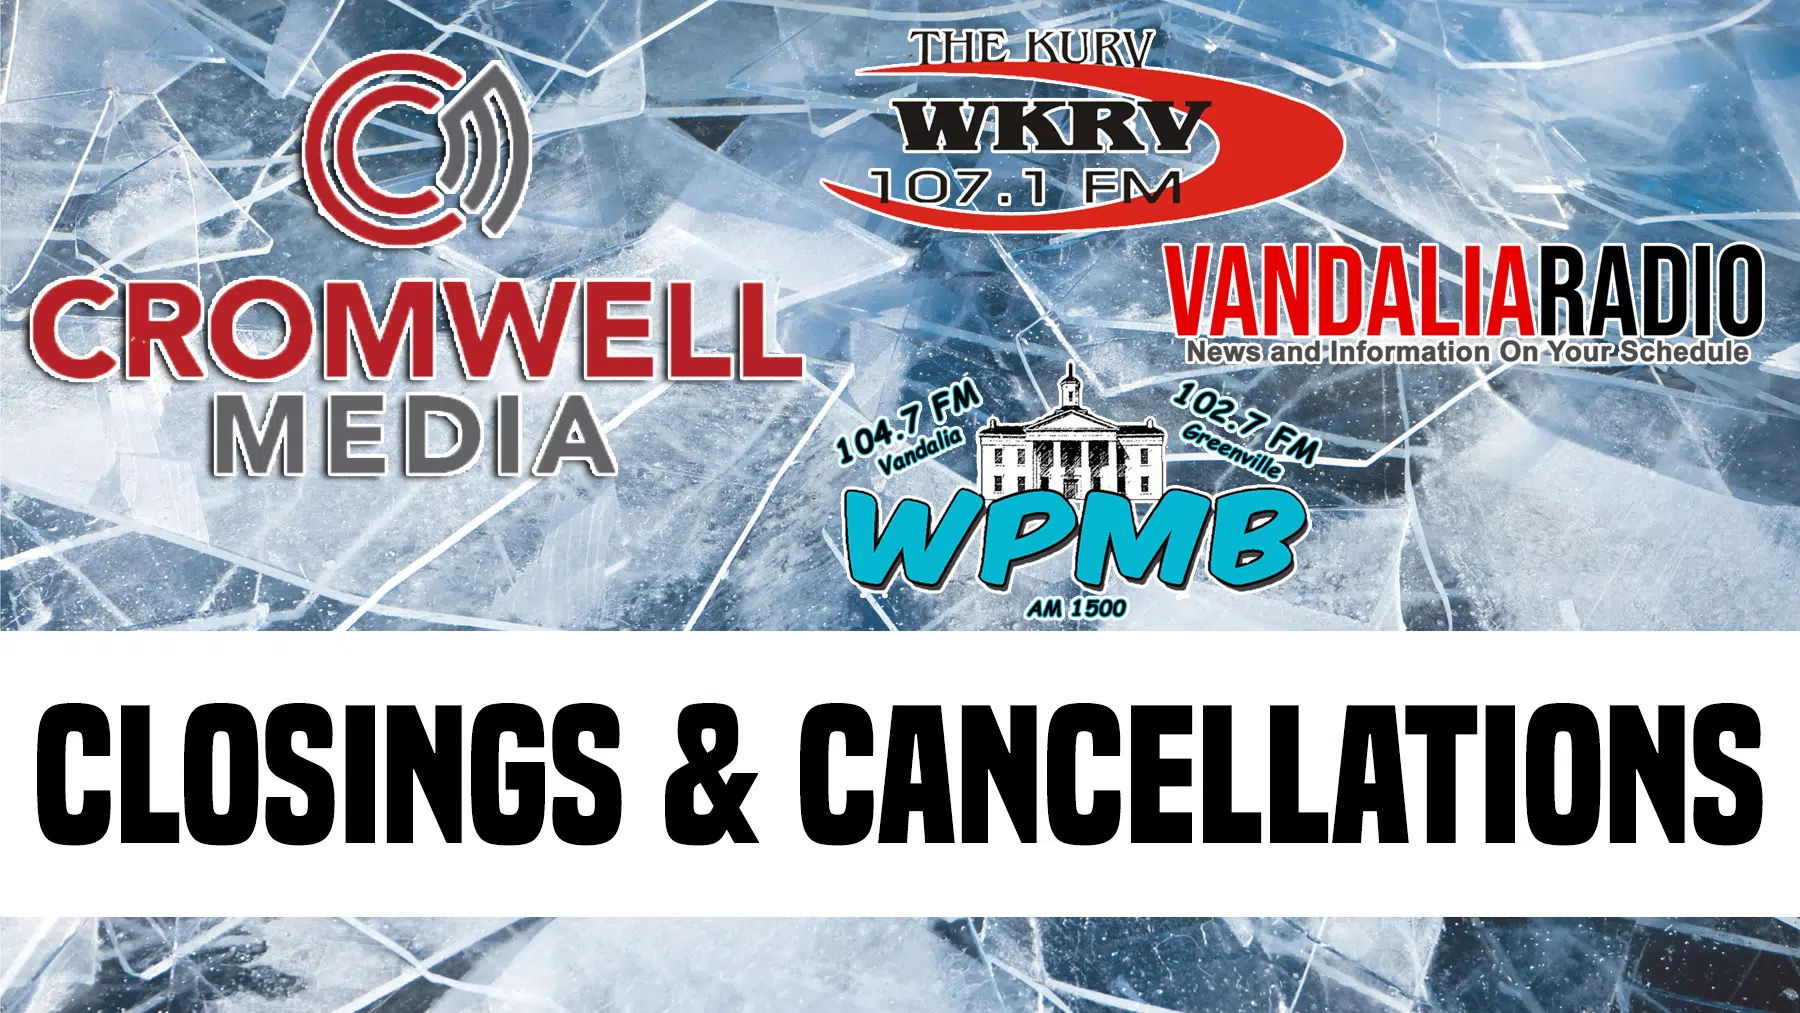 Cancellations/Closings for Friday, February 16th